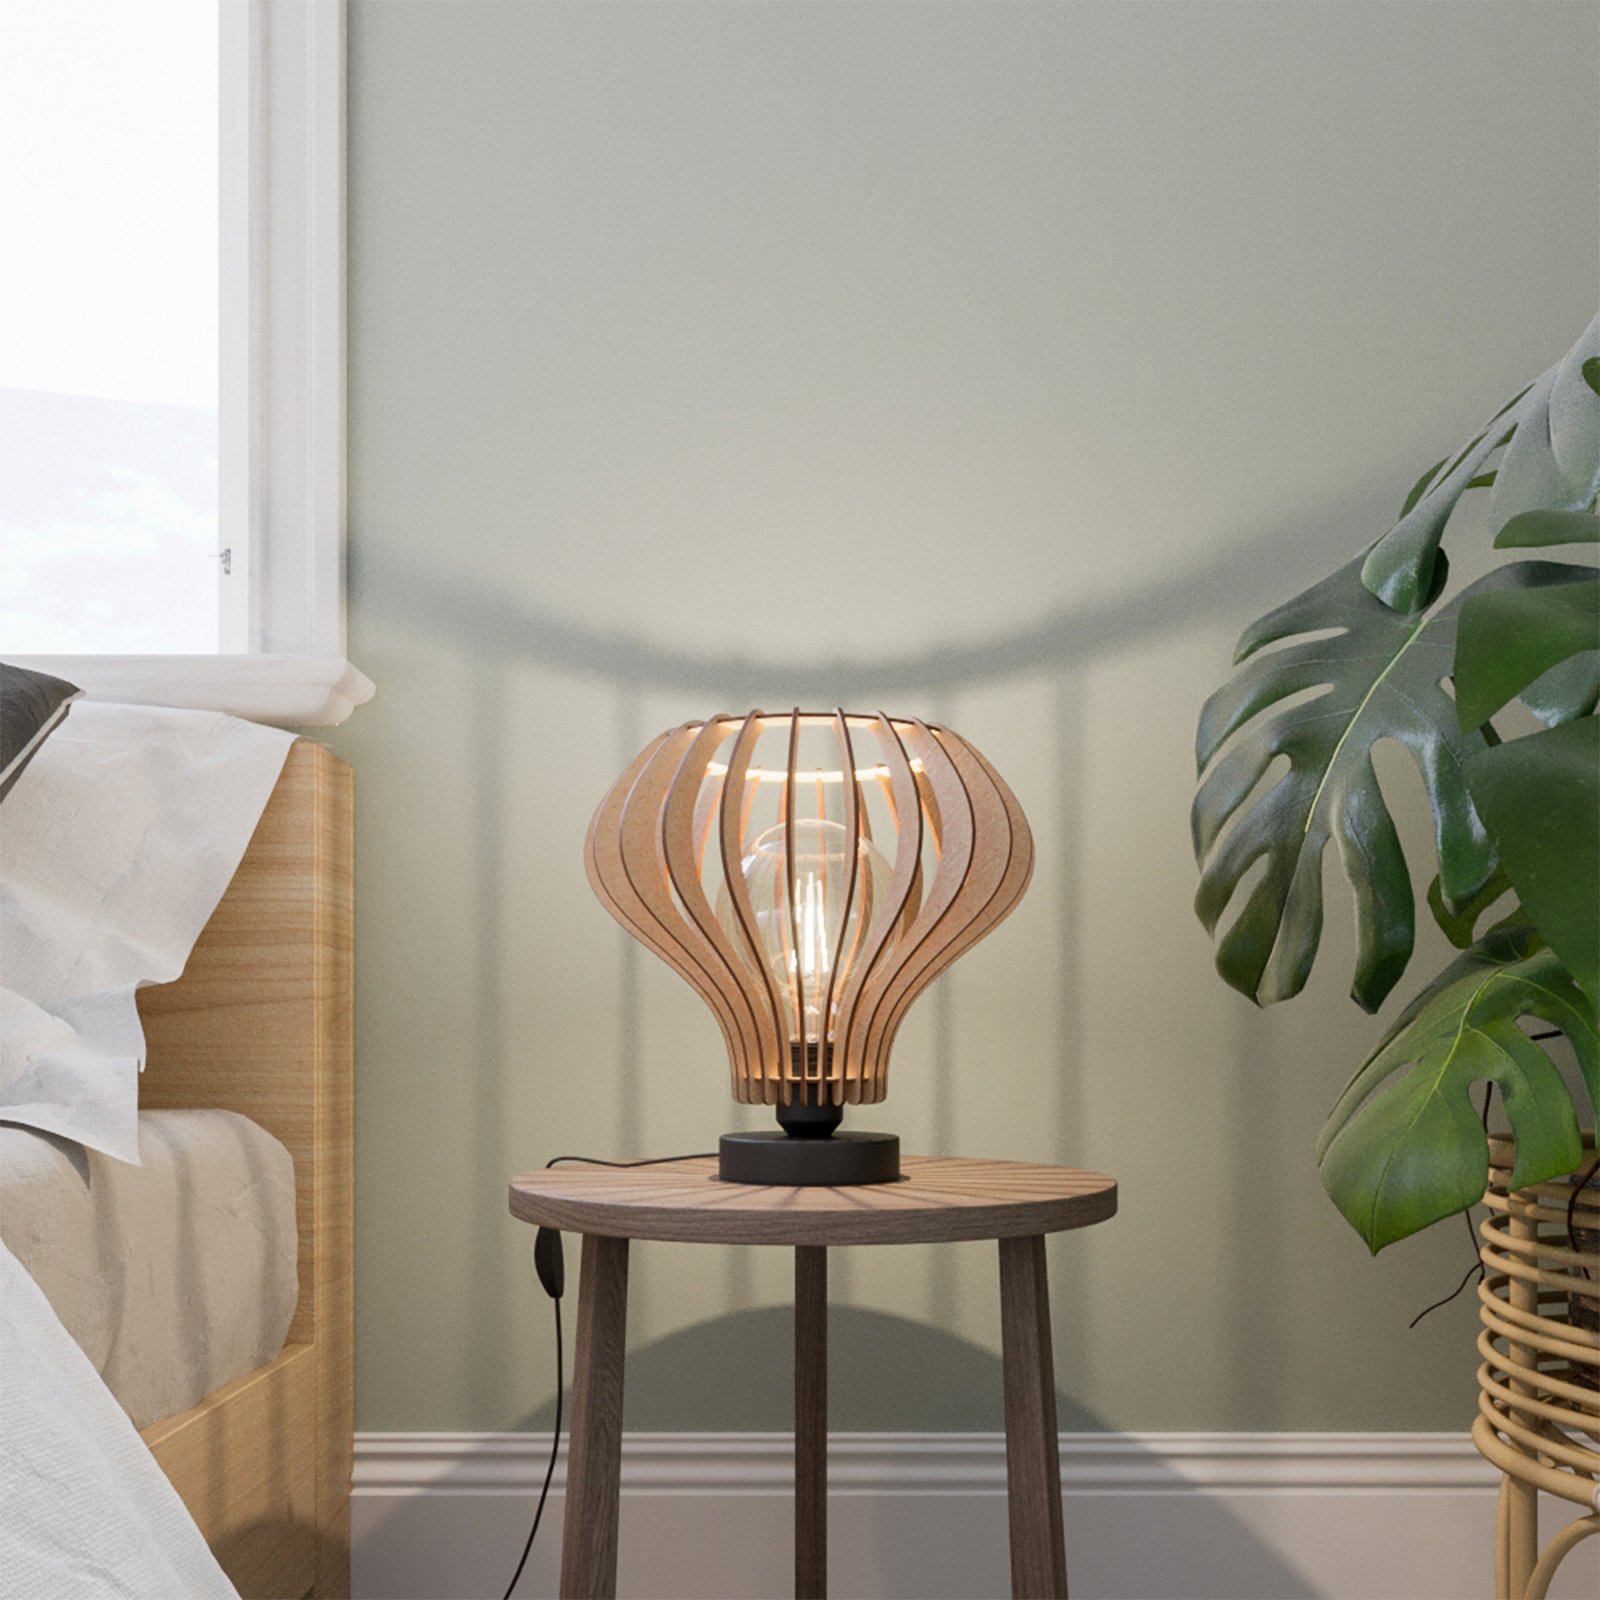 Envostar Faje table lamp made of birch plywood